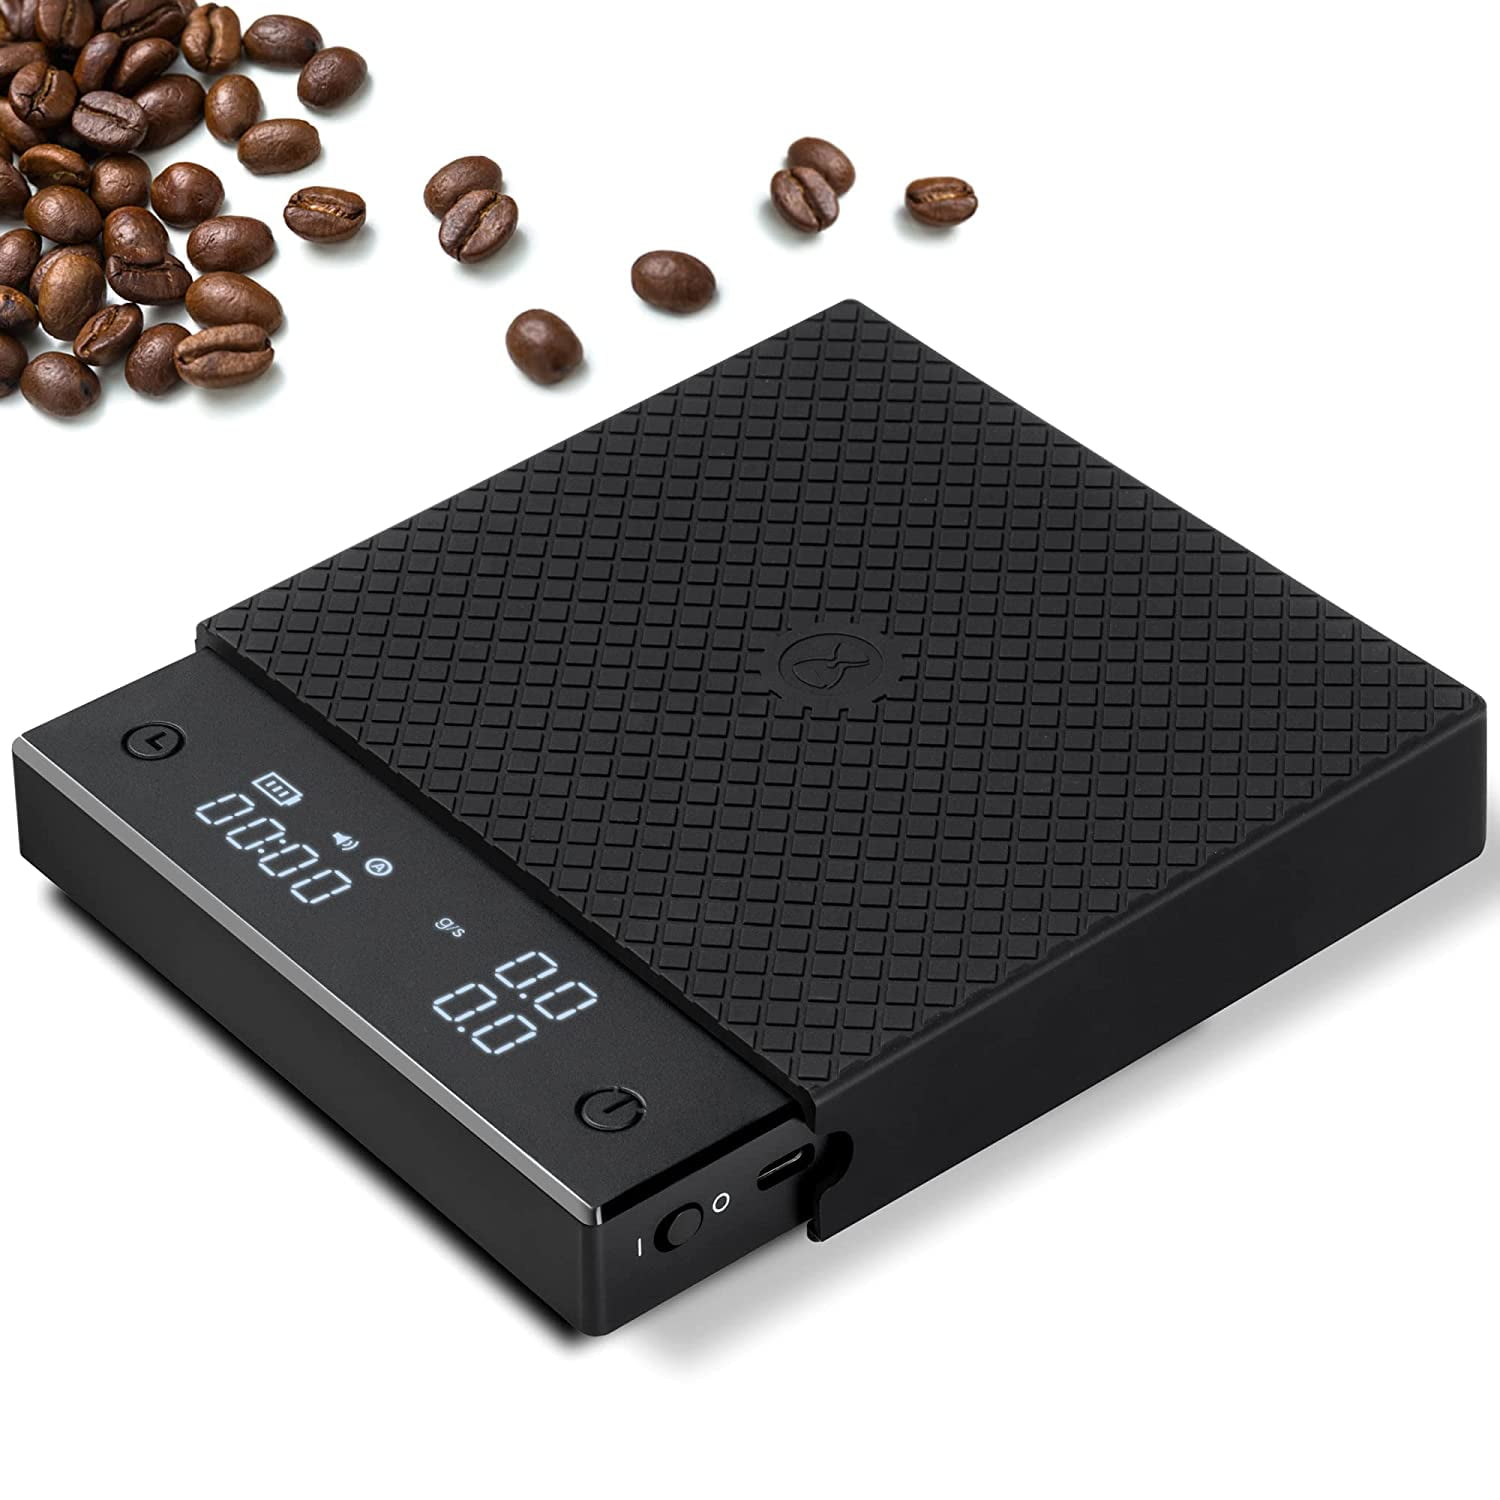  TIMEMORE Coffee Scale with Timer, Digital Scale Grams and Oz -  2kg/70oz, Pour Over Drip Espresso Scale with Auto Timer Function & Flow  Rate, Basic 2.0, Black : Industrial & Scientific